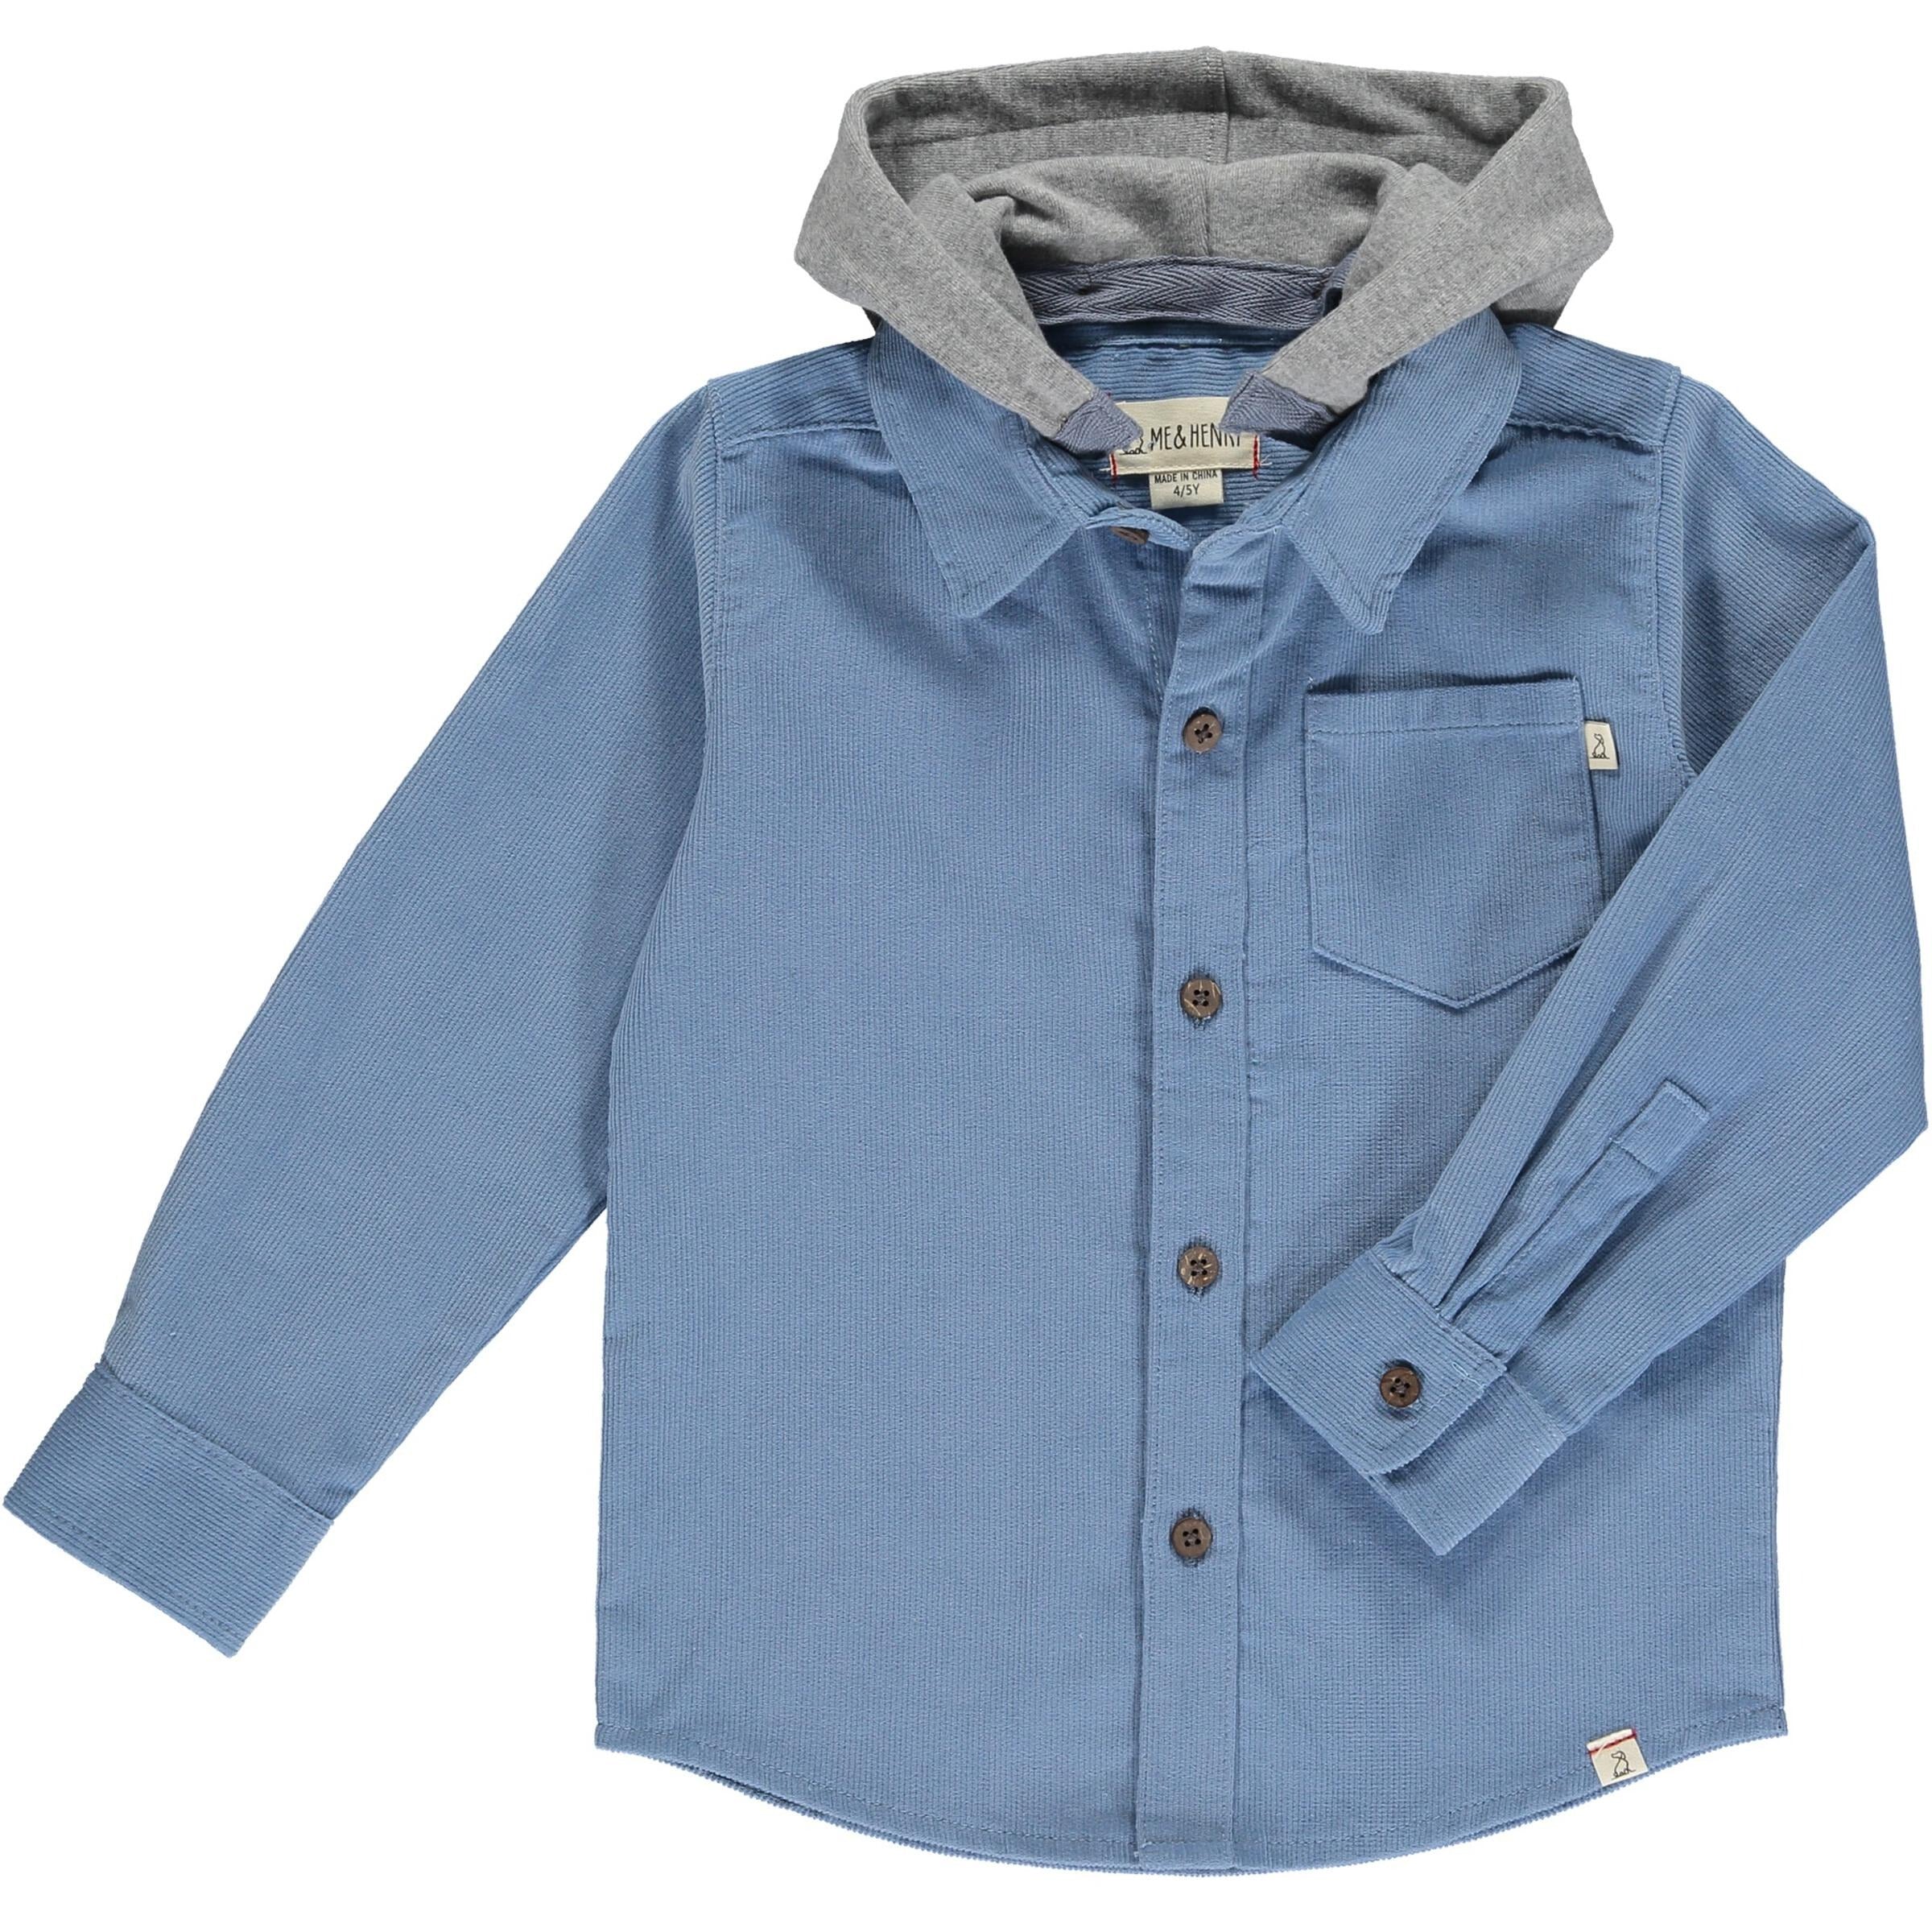 Erin Hooded Shirt - Pale Blue Cord